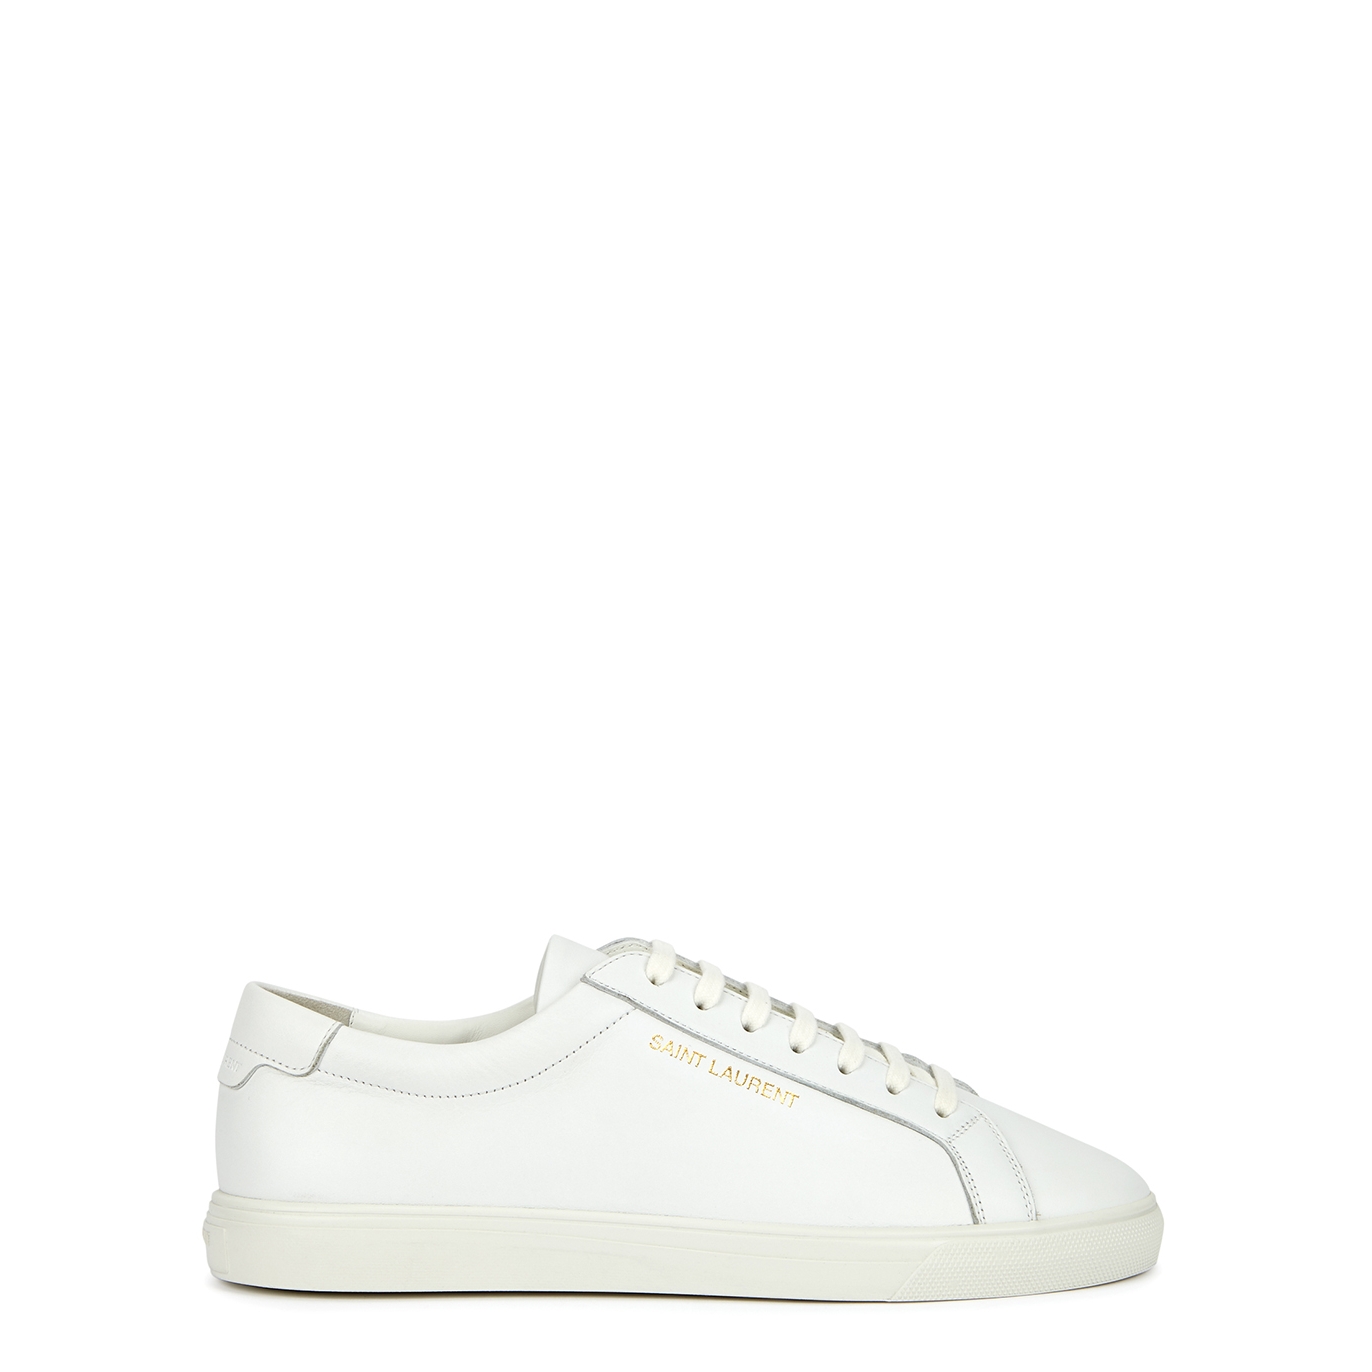 Saint Laurent Andy White Leather Sneakers - 2